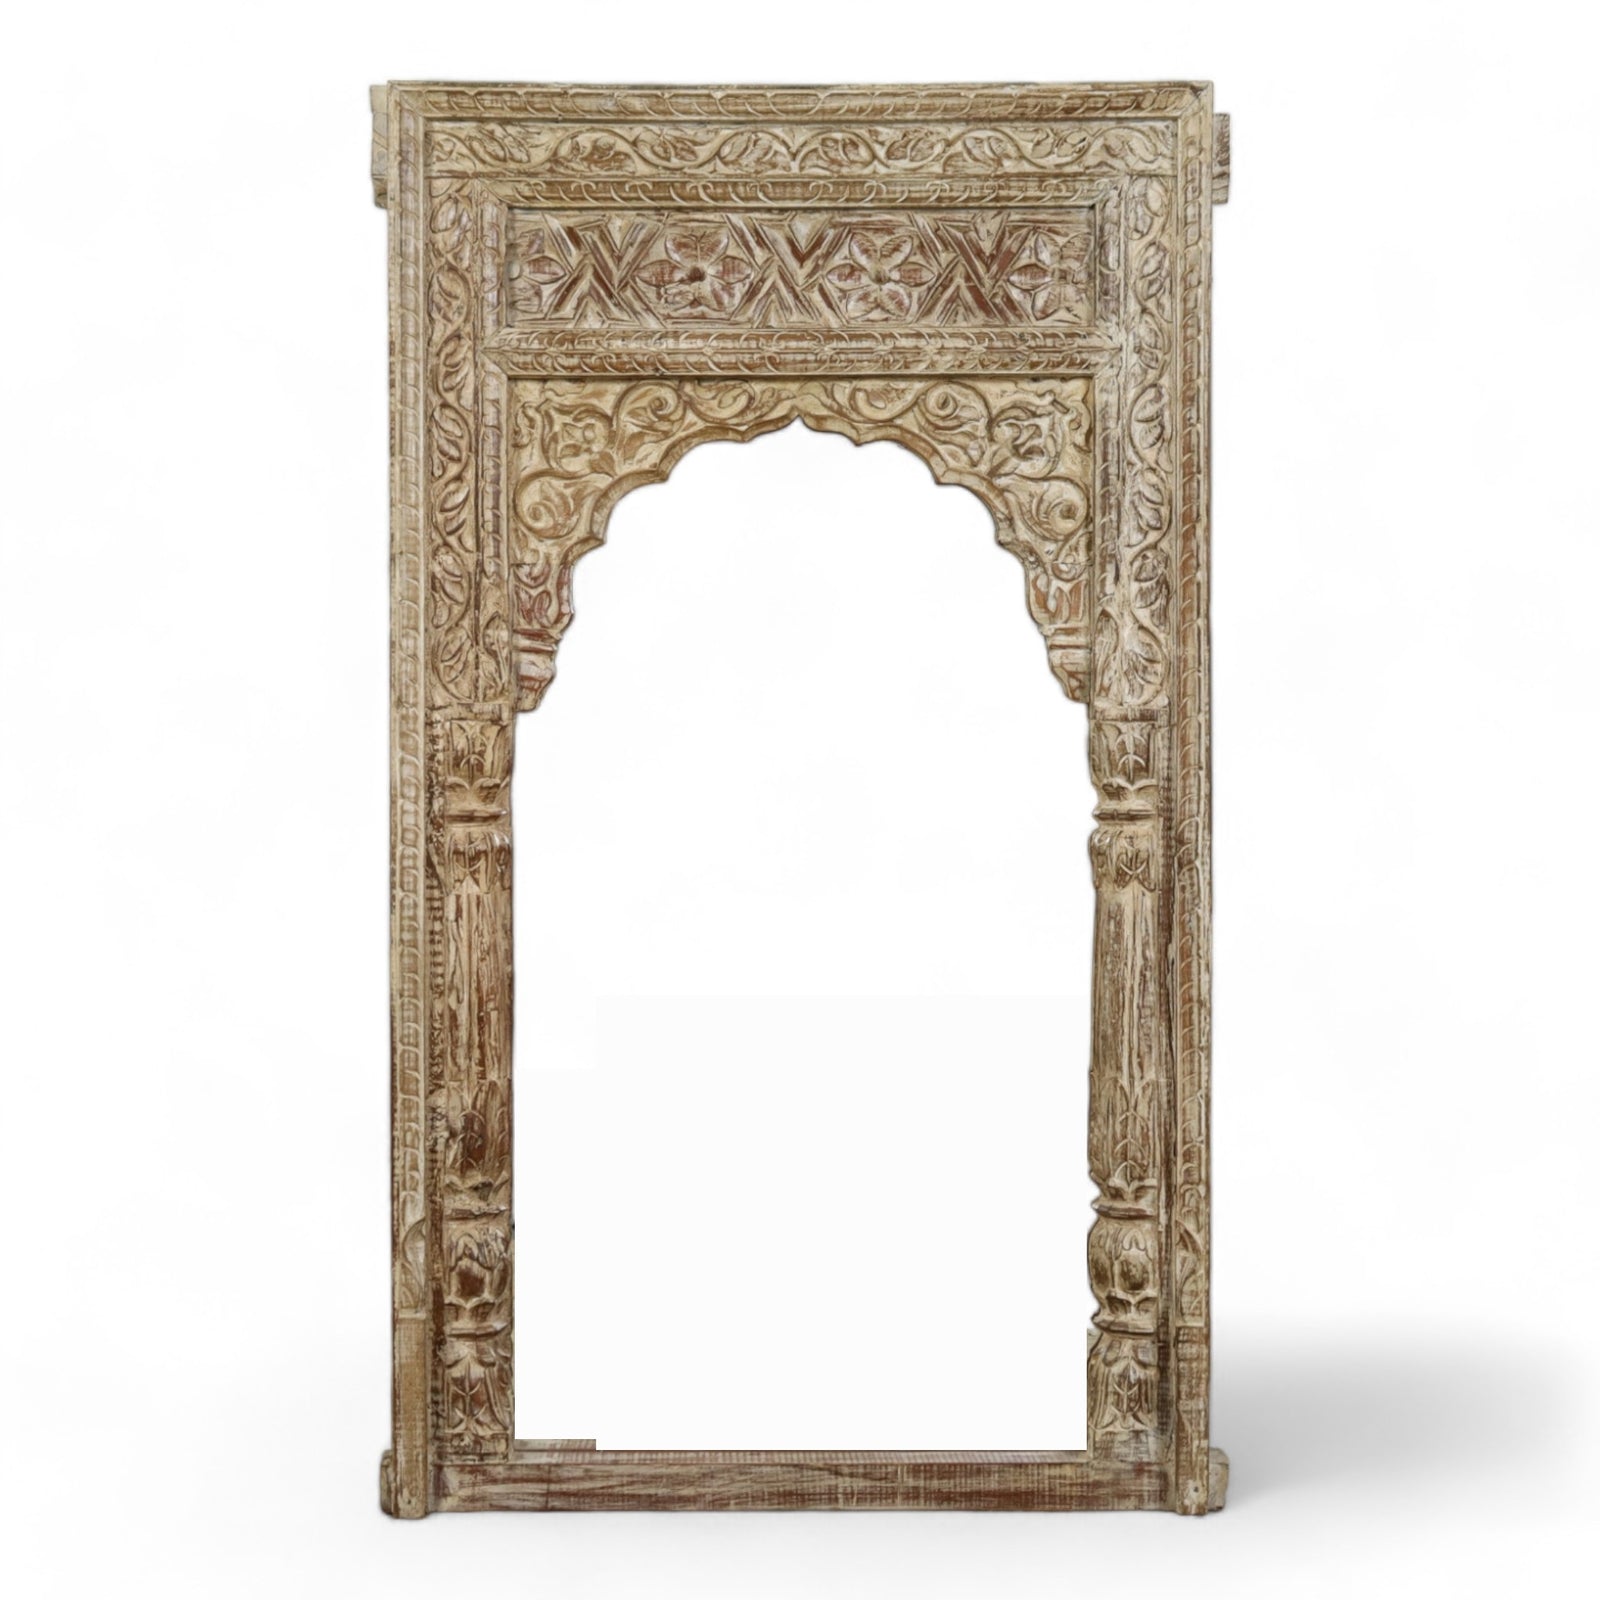 MILL-844/7 Wooden Arch With Mirror C31